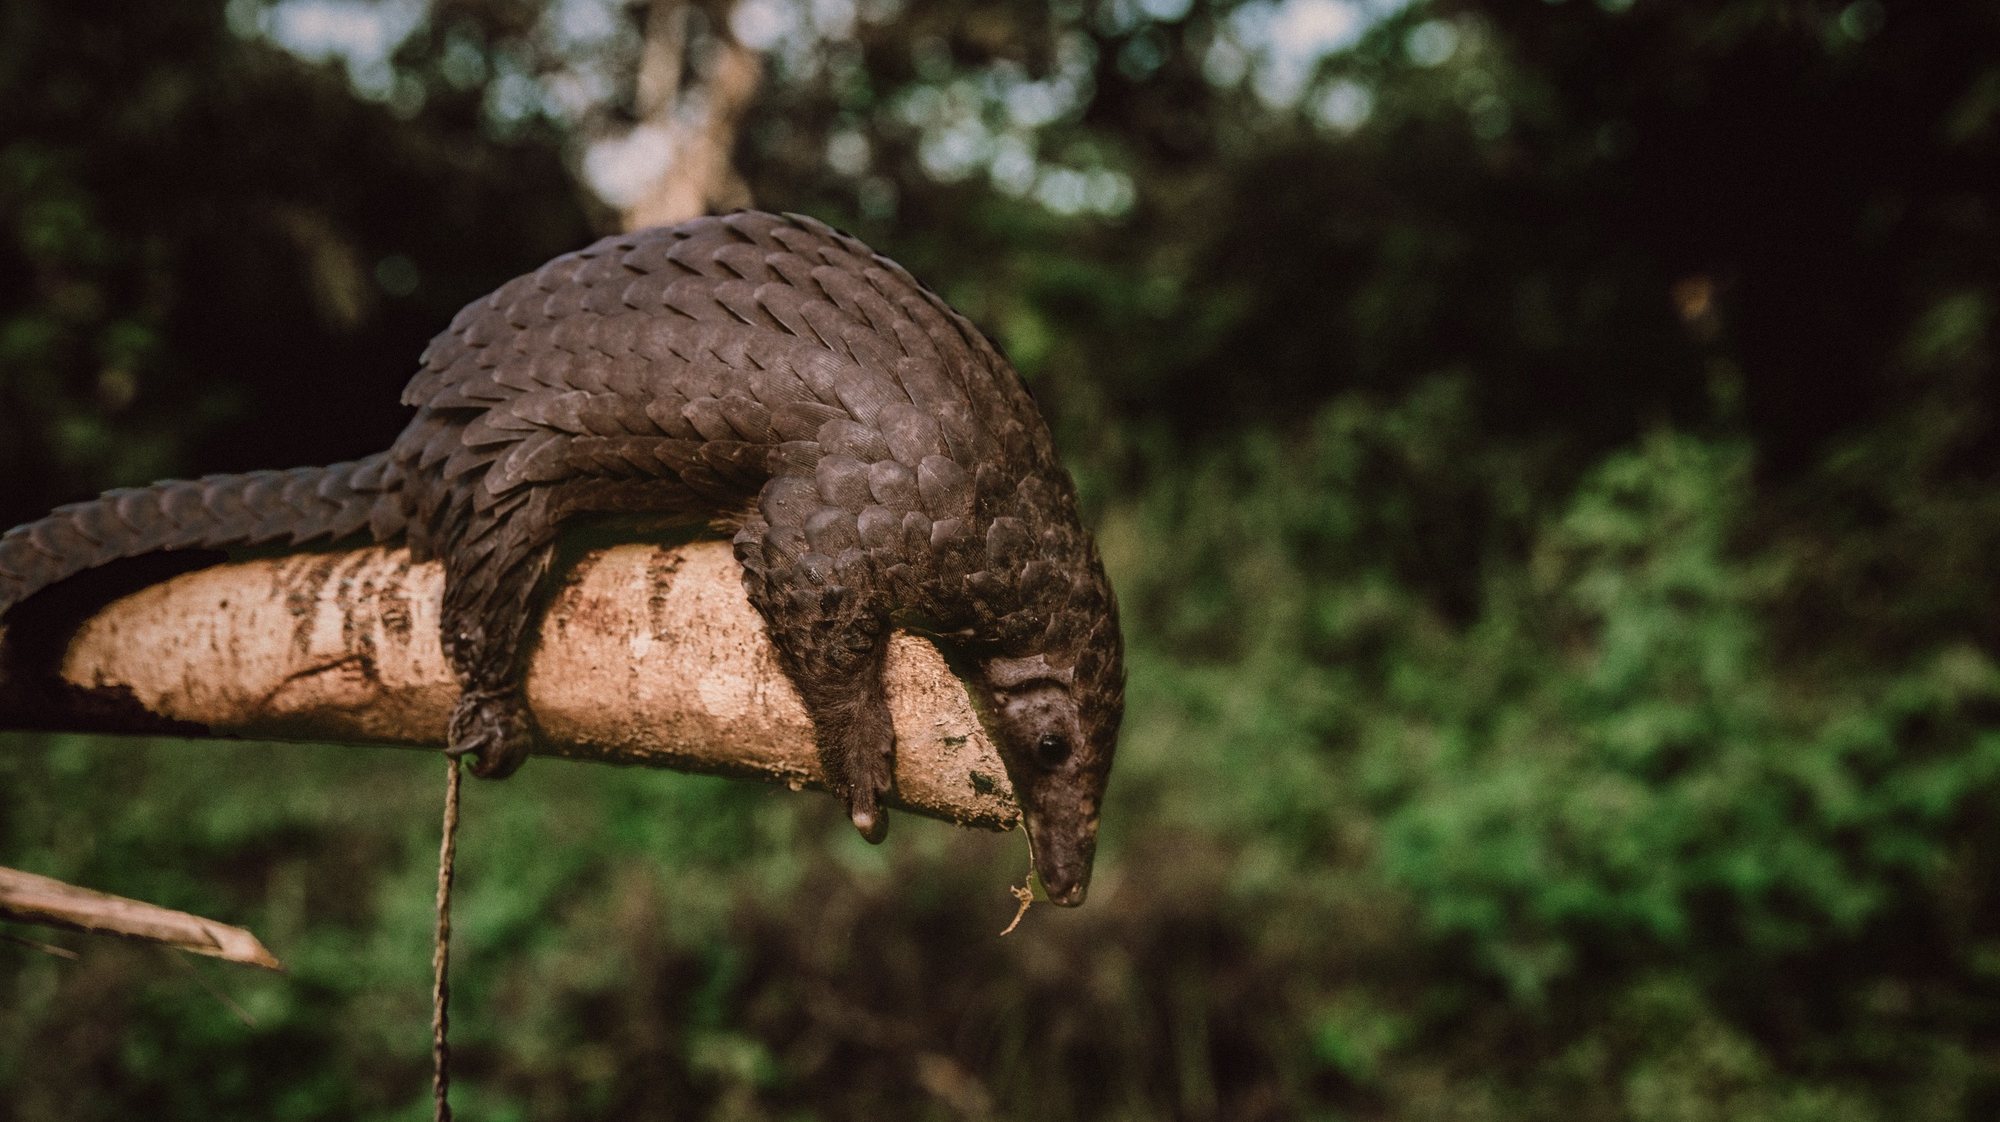 epa08891316 (07/39) A pangolin captured by hunters in the Ituri rainforest, in Mambasa territory, Democratic Republic of the Congo, 19 October 2020. The risk of a new pathogen coming in contact with human populations is increased in areas with high biodiversity like Congo. Over 72 percent of the country lives on less than USD 1.90 a day, which makes free sources of food like hunting essential in parts of the country where hunting and fishing are a viable option. Human populations come into contact with animals and pathogens during activities such as hunting for food or the exotic animal trade and deforestation. With deforestation and habitat loss, animals are more likely to move into new areas and come into contact with human beings for the first time. Humans living in these high-risk areas have a far greater chance of becoming a &#039;patient zero&#039; for virus spillover than elsewhere. The exotic animal trade is also an attractive source of revenue as Congo still hosts many exotic animals, including pangolins, the mammal suspected to be a secondary host for COVID-19 before it spilled over into the human population. There exists a precarious situation where conservation is a losing battle due to governance factors, and Congo’s biodiversity posits a distinct likelihood for a new virus to jump from an animal to a human population. Mammals alone are estimated to host at least 320,000 undiscovered viruses.  EPA/Hugh Kinsella Cunningham ATTENTION EDITORS / MANDATORY CREDIT : This story was produced in partnership with the Pulitzer Center -- For the full PHOTO ESSAY text please see Advisory Notice epa...